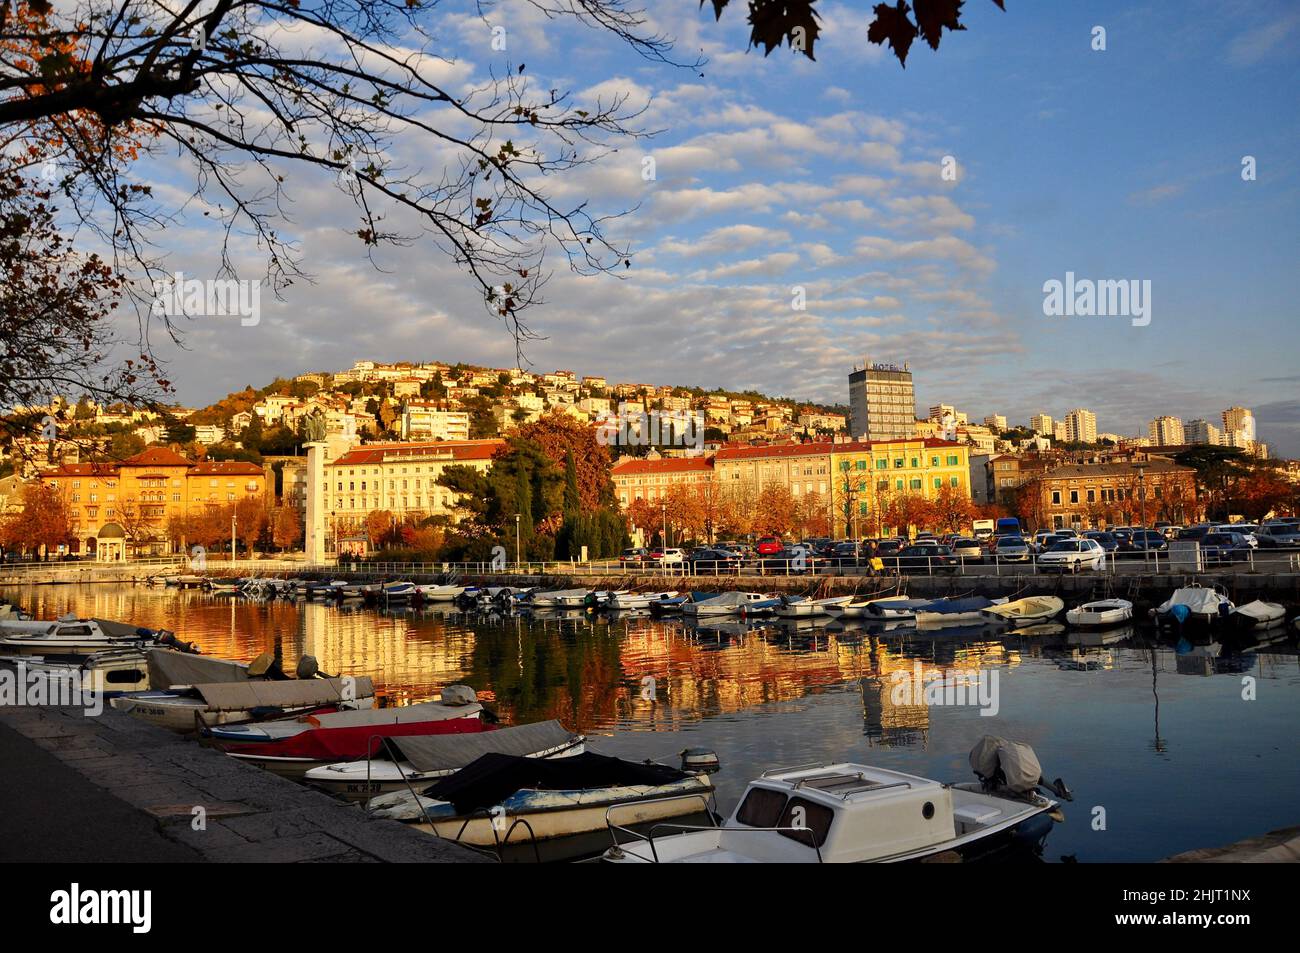 City of Rijeka Delta and trsat view.Croatia, city of Rijeka, skyline view from Delta and Rjecina river over the boats in front, colorful old buildings. Stock Photo